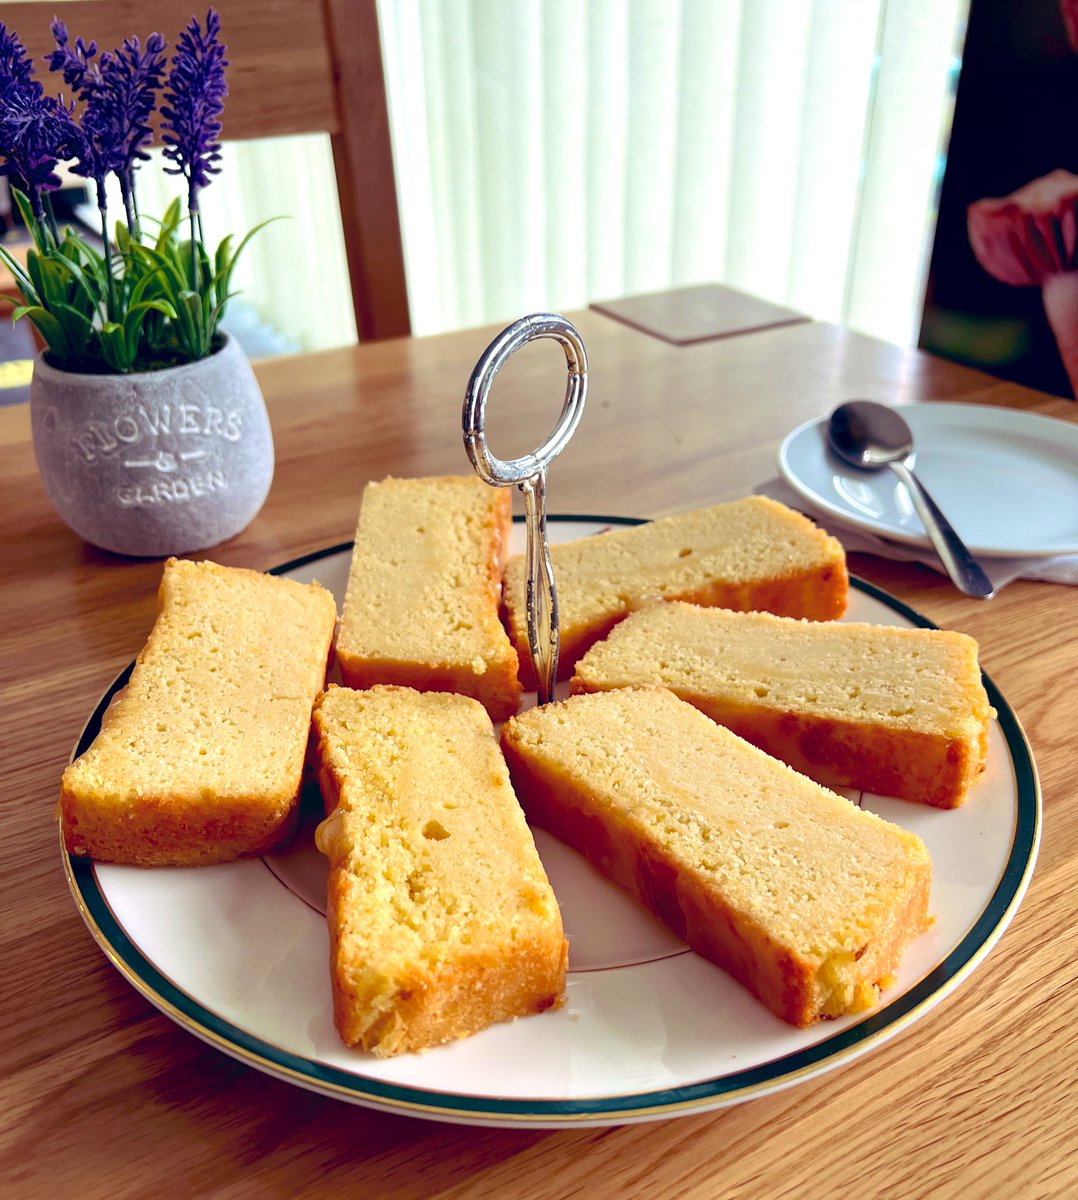 Our delicious homemade Lemon Drizzle Slices are simply the zest! 🍋🍰😊💛

We are open tomorrow from 10am-4pm 🙌😃

#LemonDrizzle #WildFood #CakeGoals #Cake #CakeHeaven #Coffee #ParcSlip #WildlifeTrust #Bridgend #SupportLocal #FreeParking #NatureReserve #Walks #Delicious